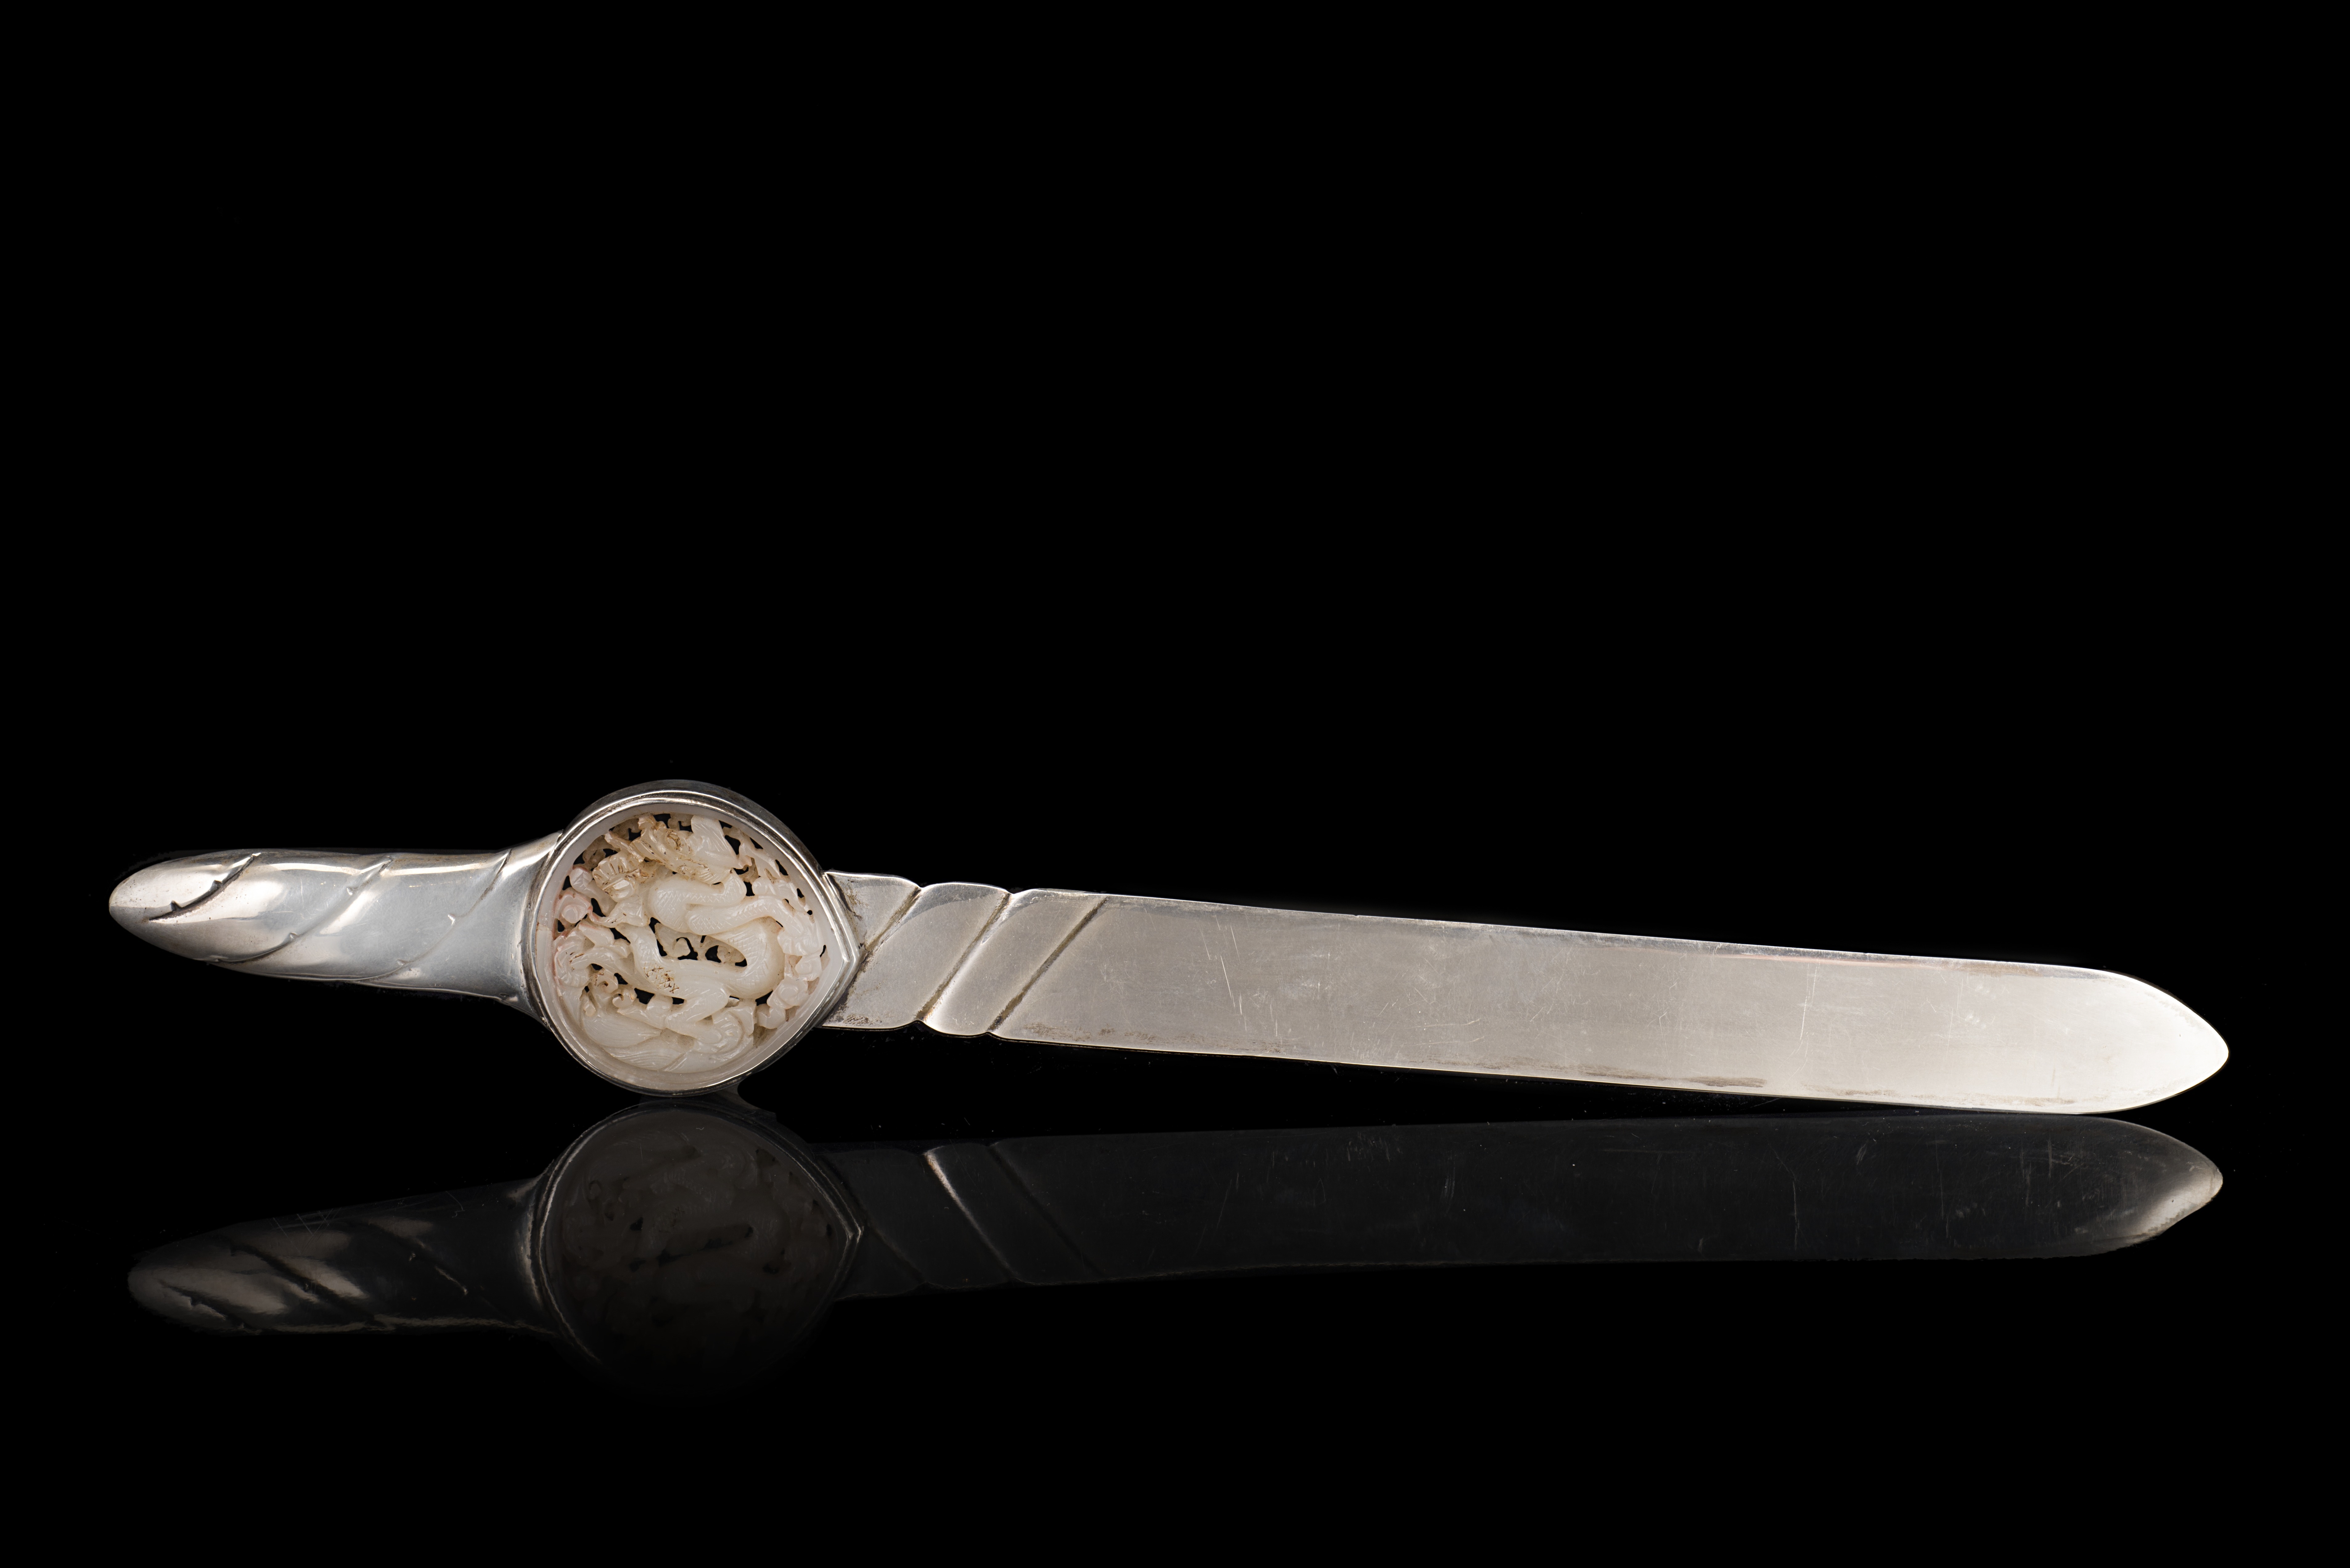 A silver paperknife with inset jade plaqueChina, 20th century(l. 37.5 cm.)ITTagliacarte in argento